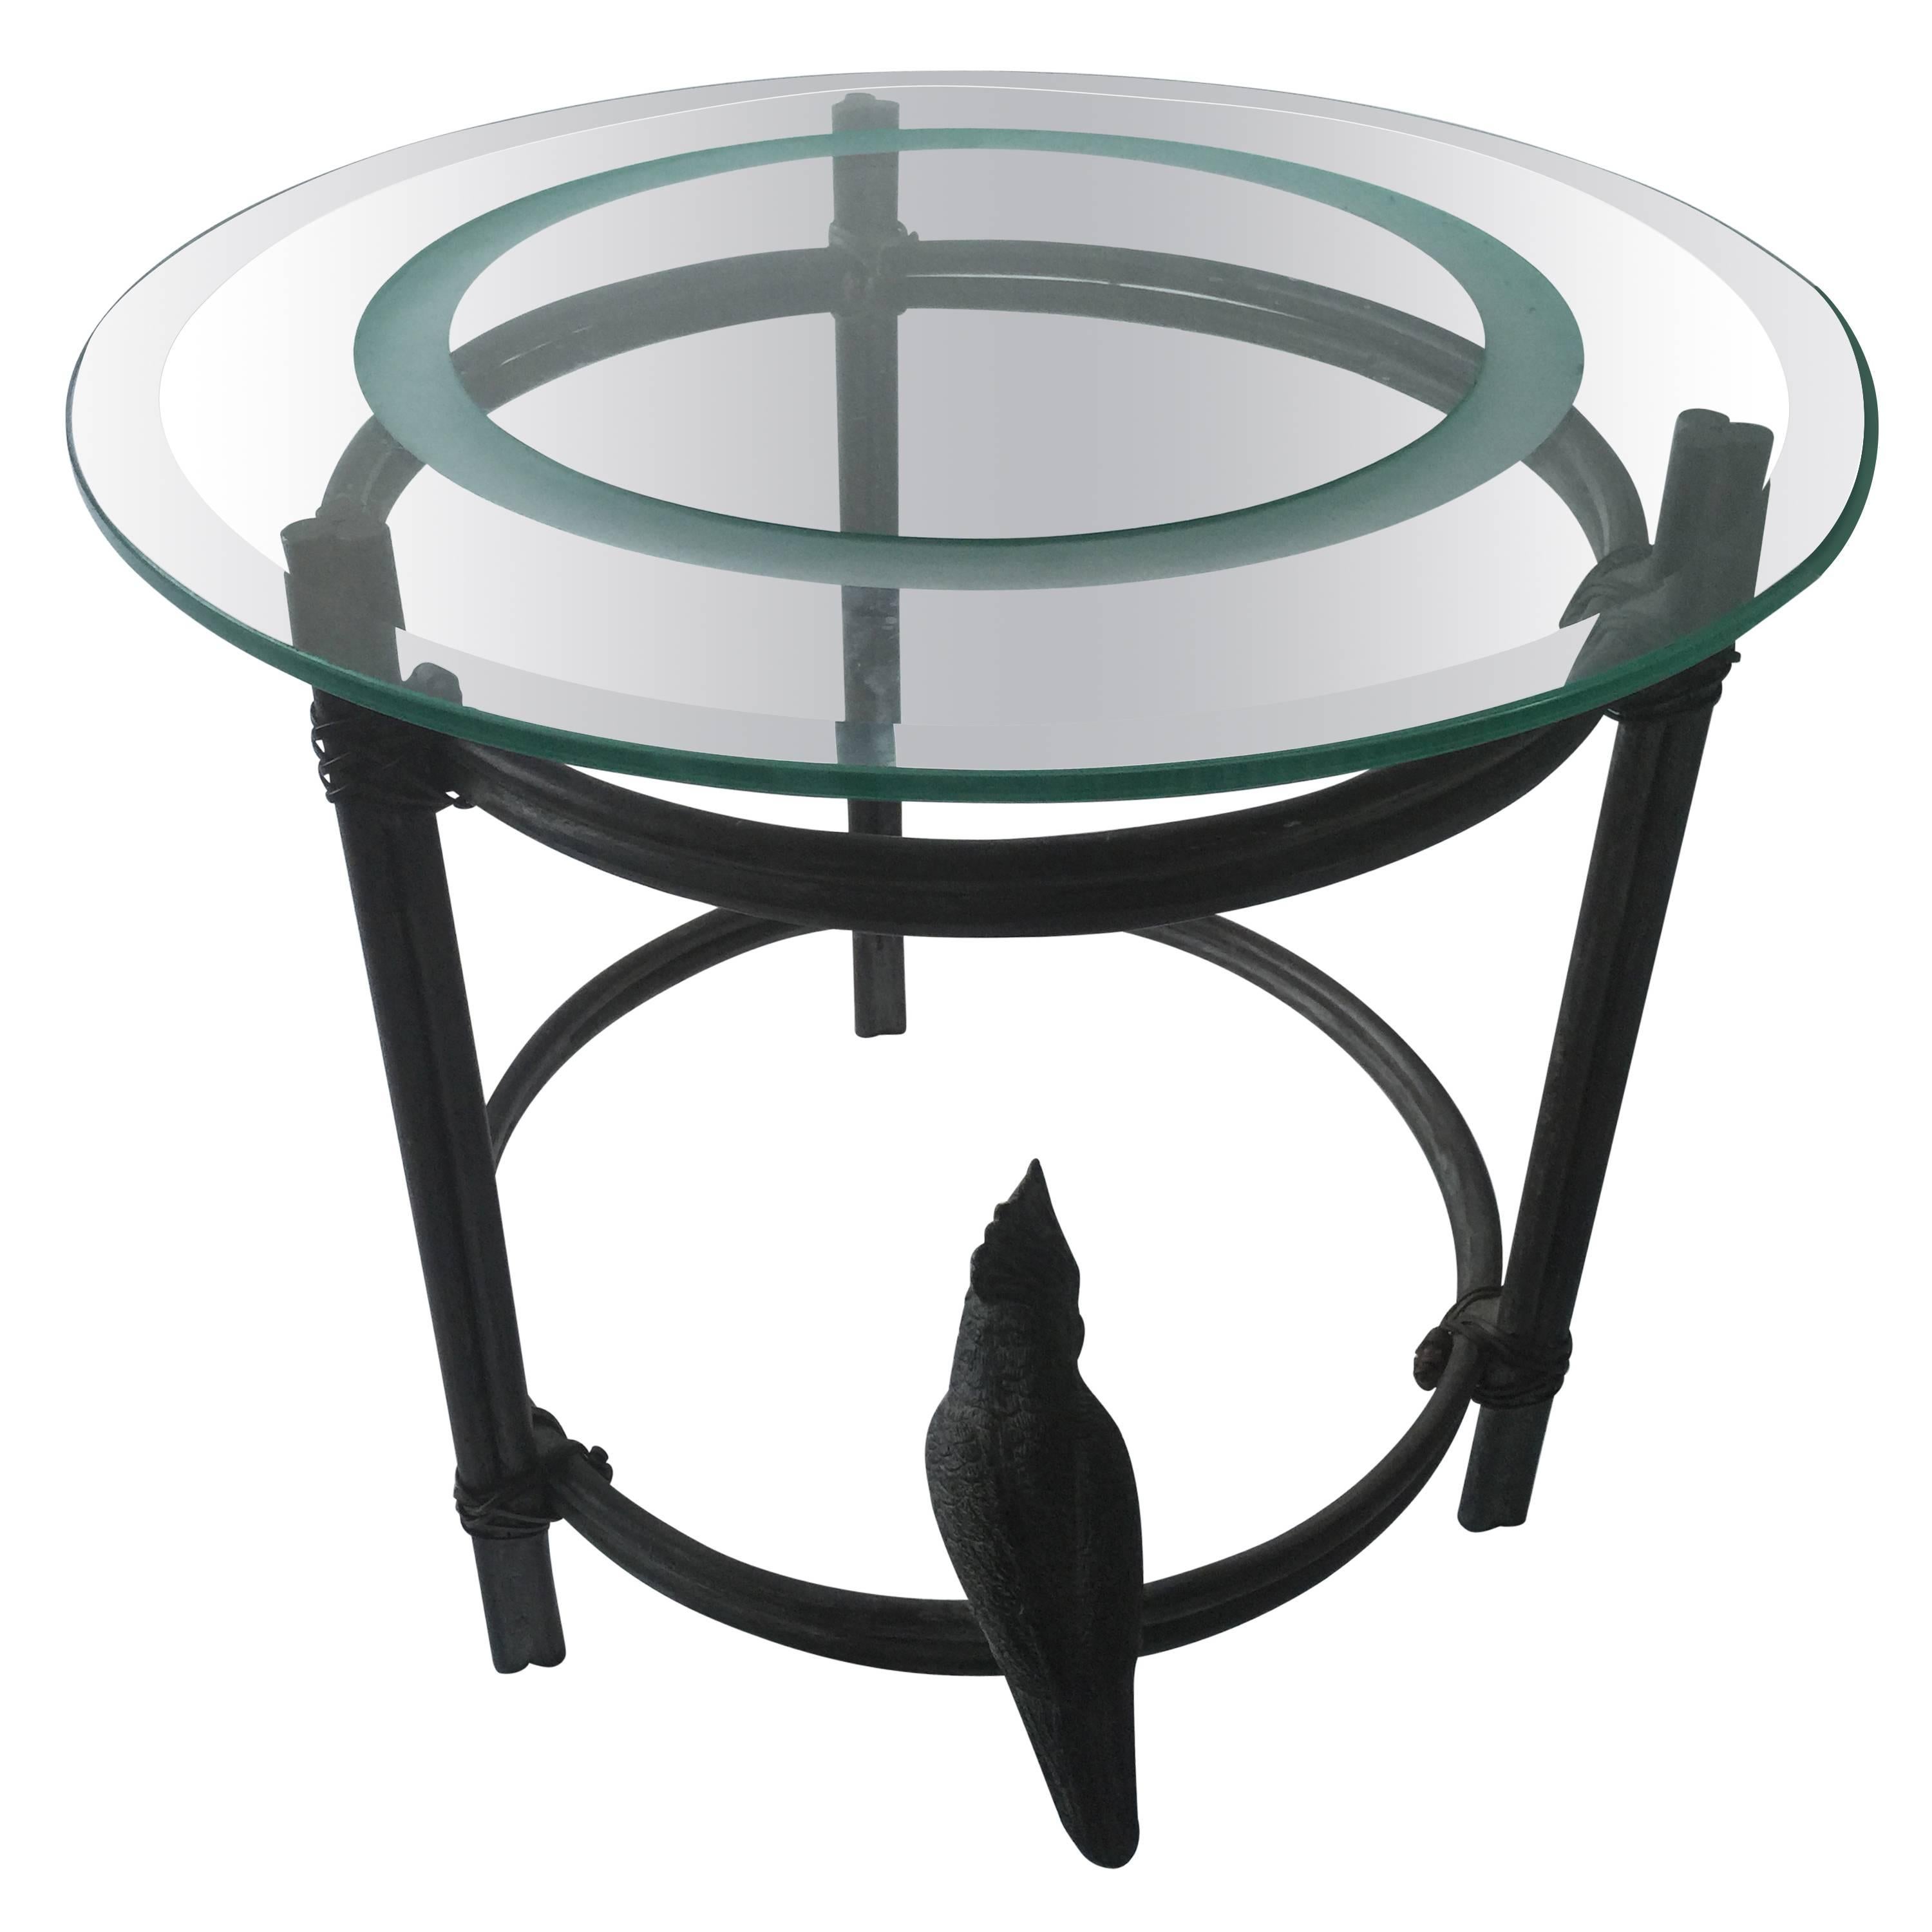 Diego Giacometti Inspired Bronze Cockatoo Table For Sale